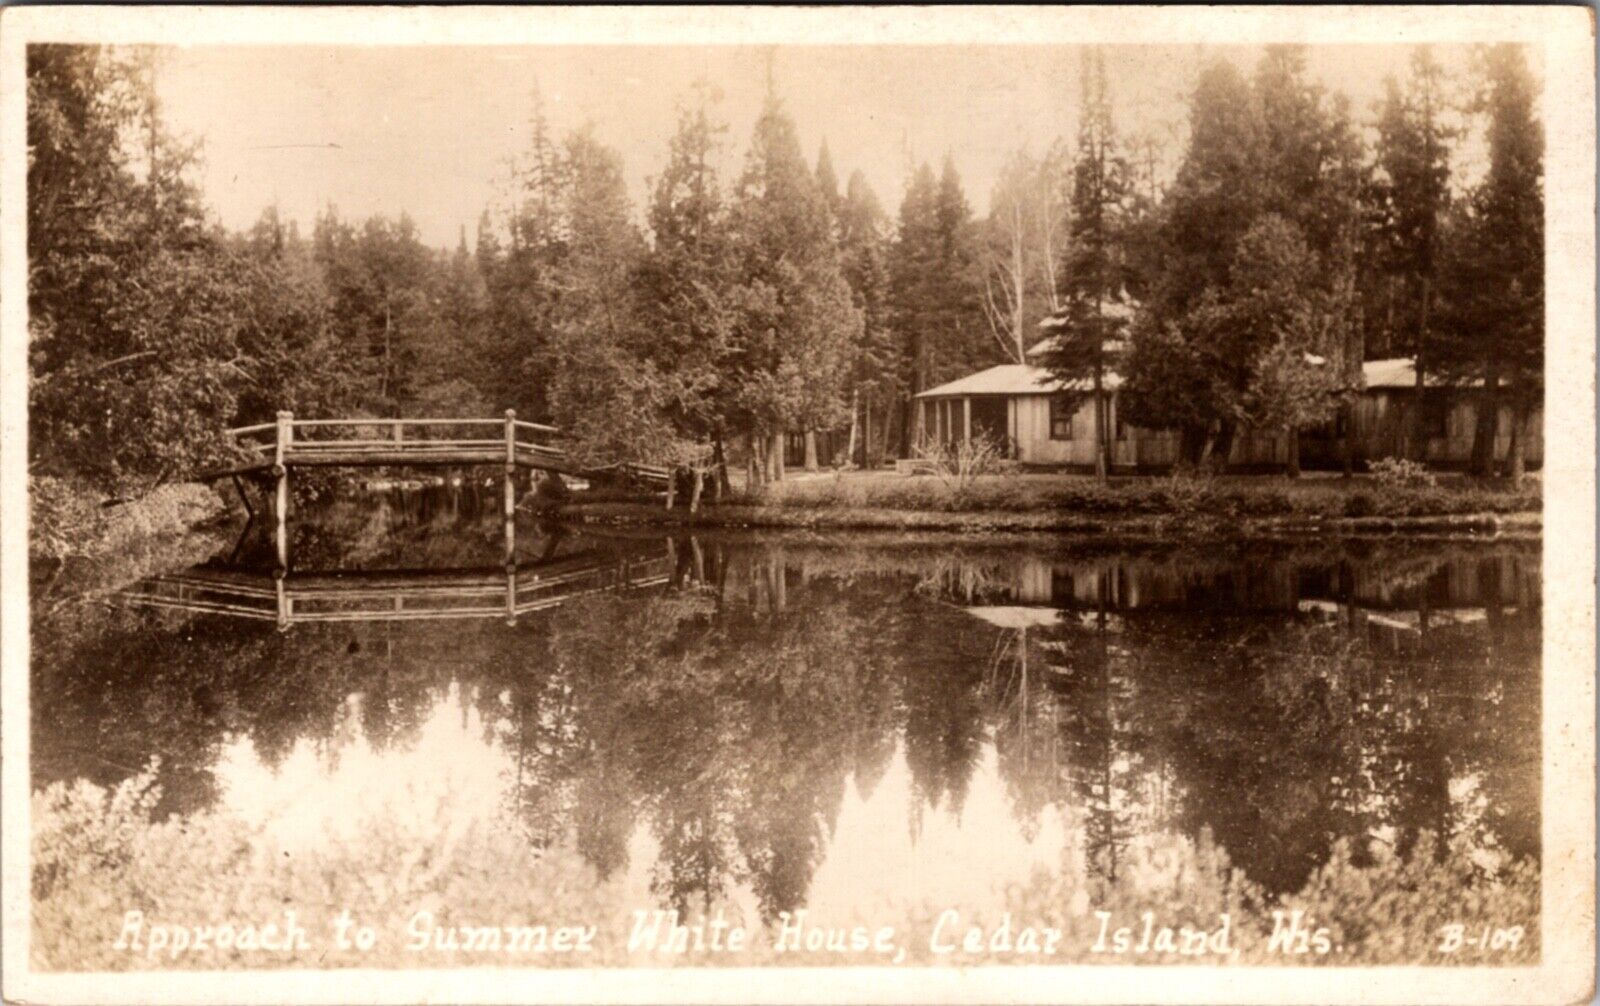 Real Photo Postcard Approach to Summer White House in Cedar Island, Wisconsin